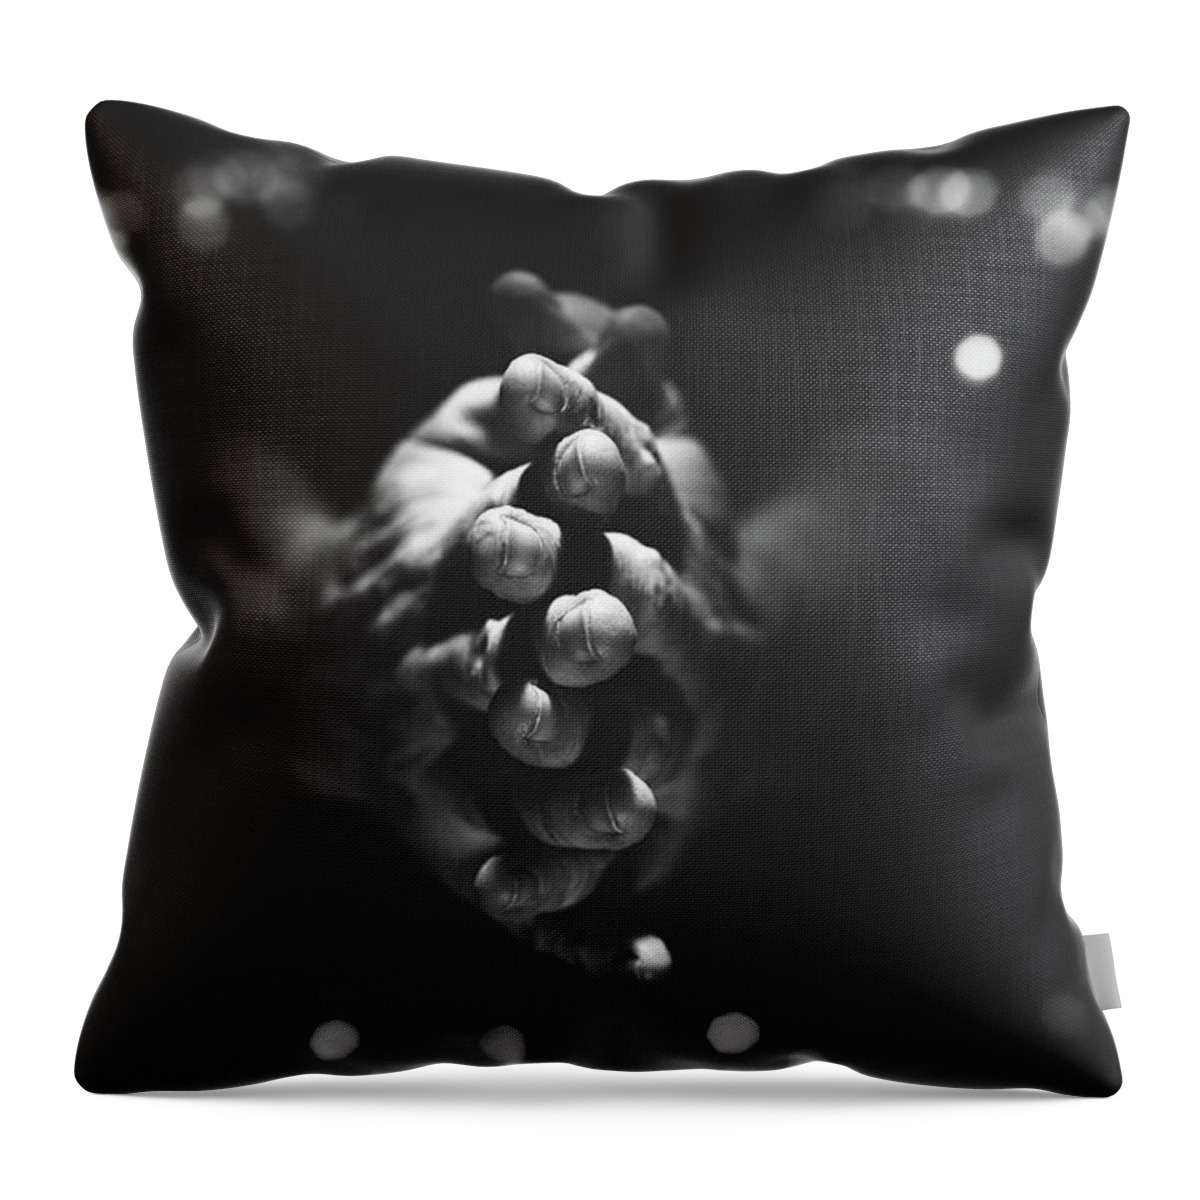 Plead Throw Pillow featuring the photograph Pleading by Scott Norris